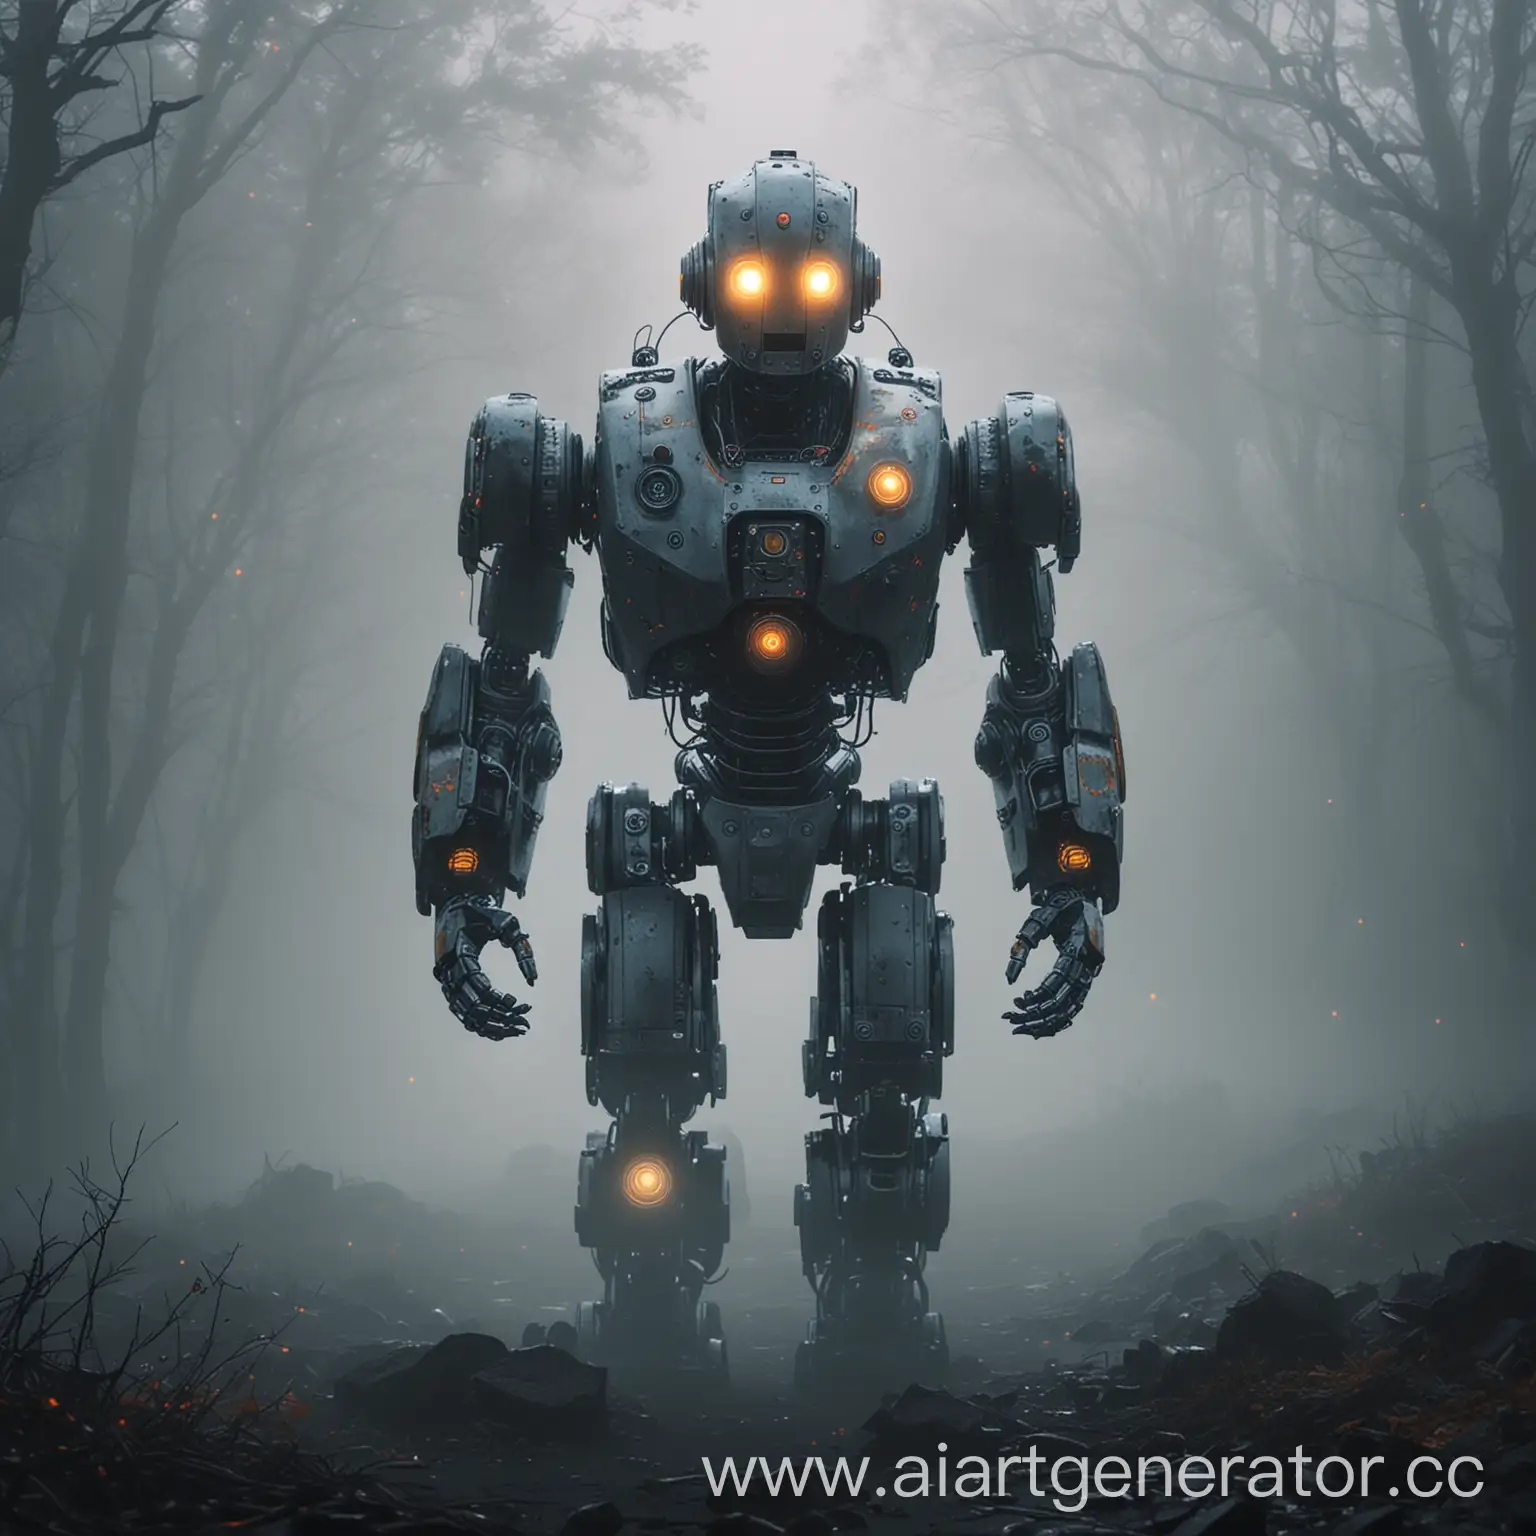 Robot-in-Fog-with-Glowing-Eyes